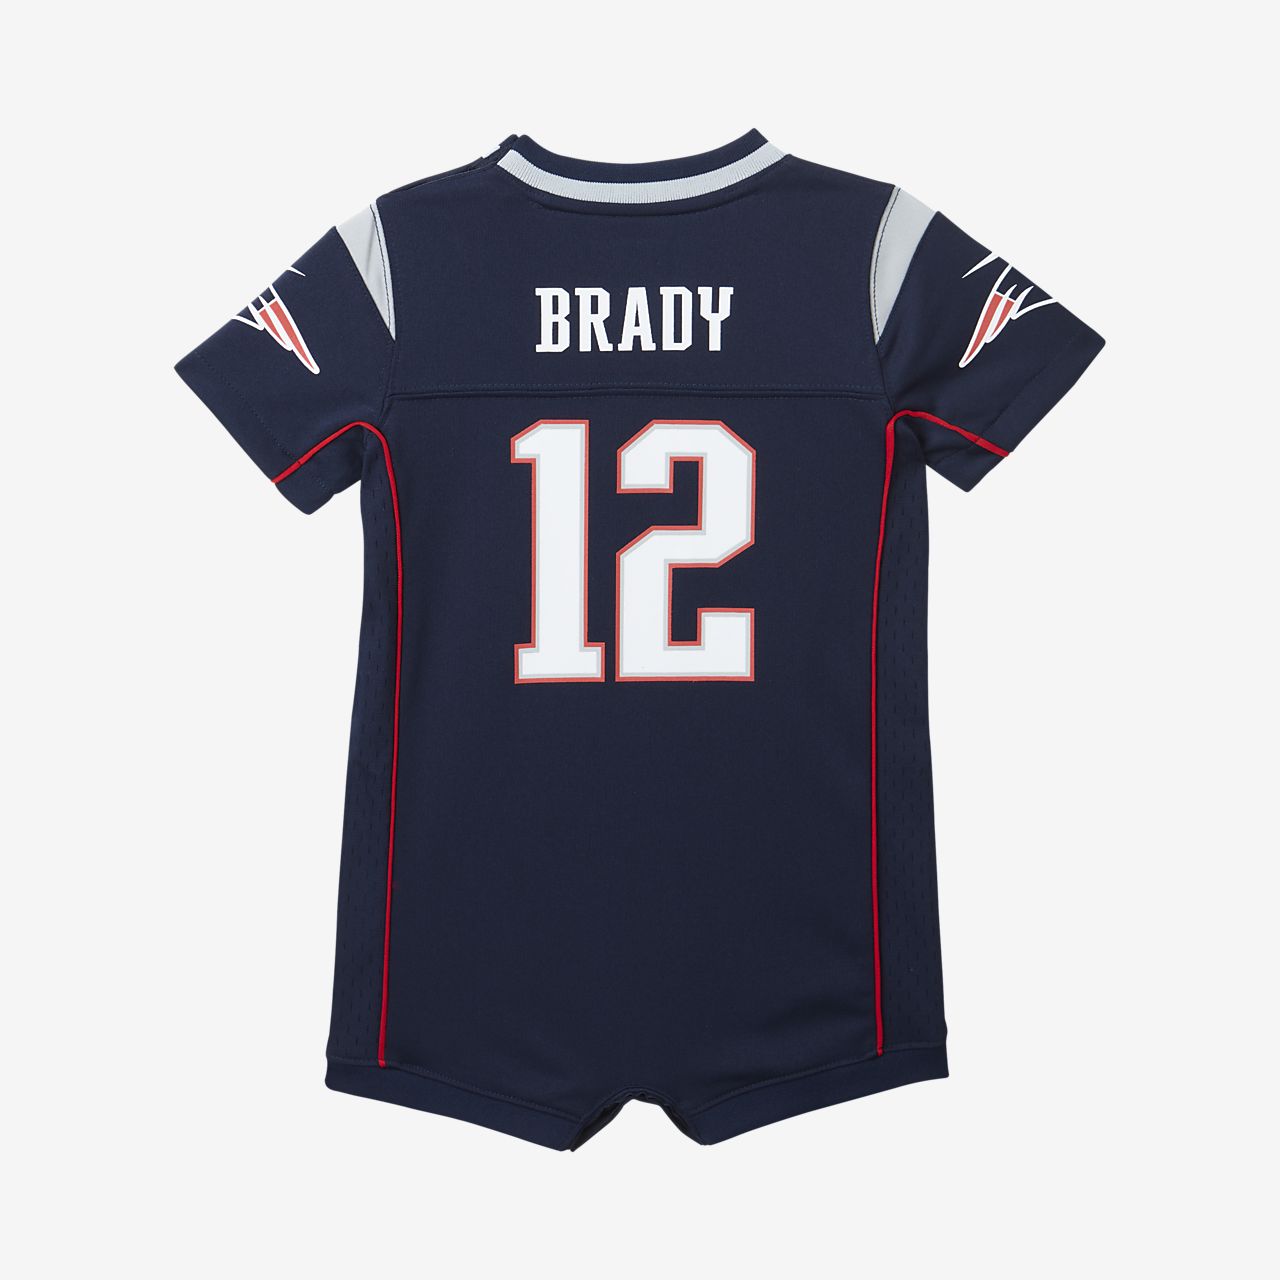 NFL New England Patriots (Tom Brady) Baby and Toddler Romper